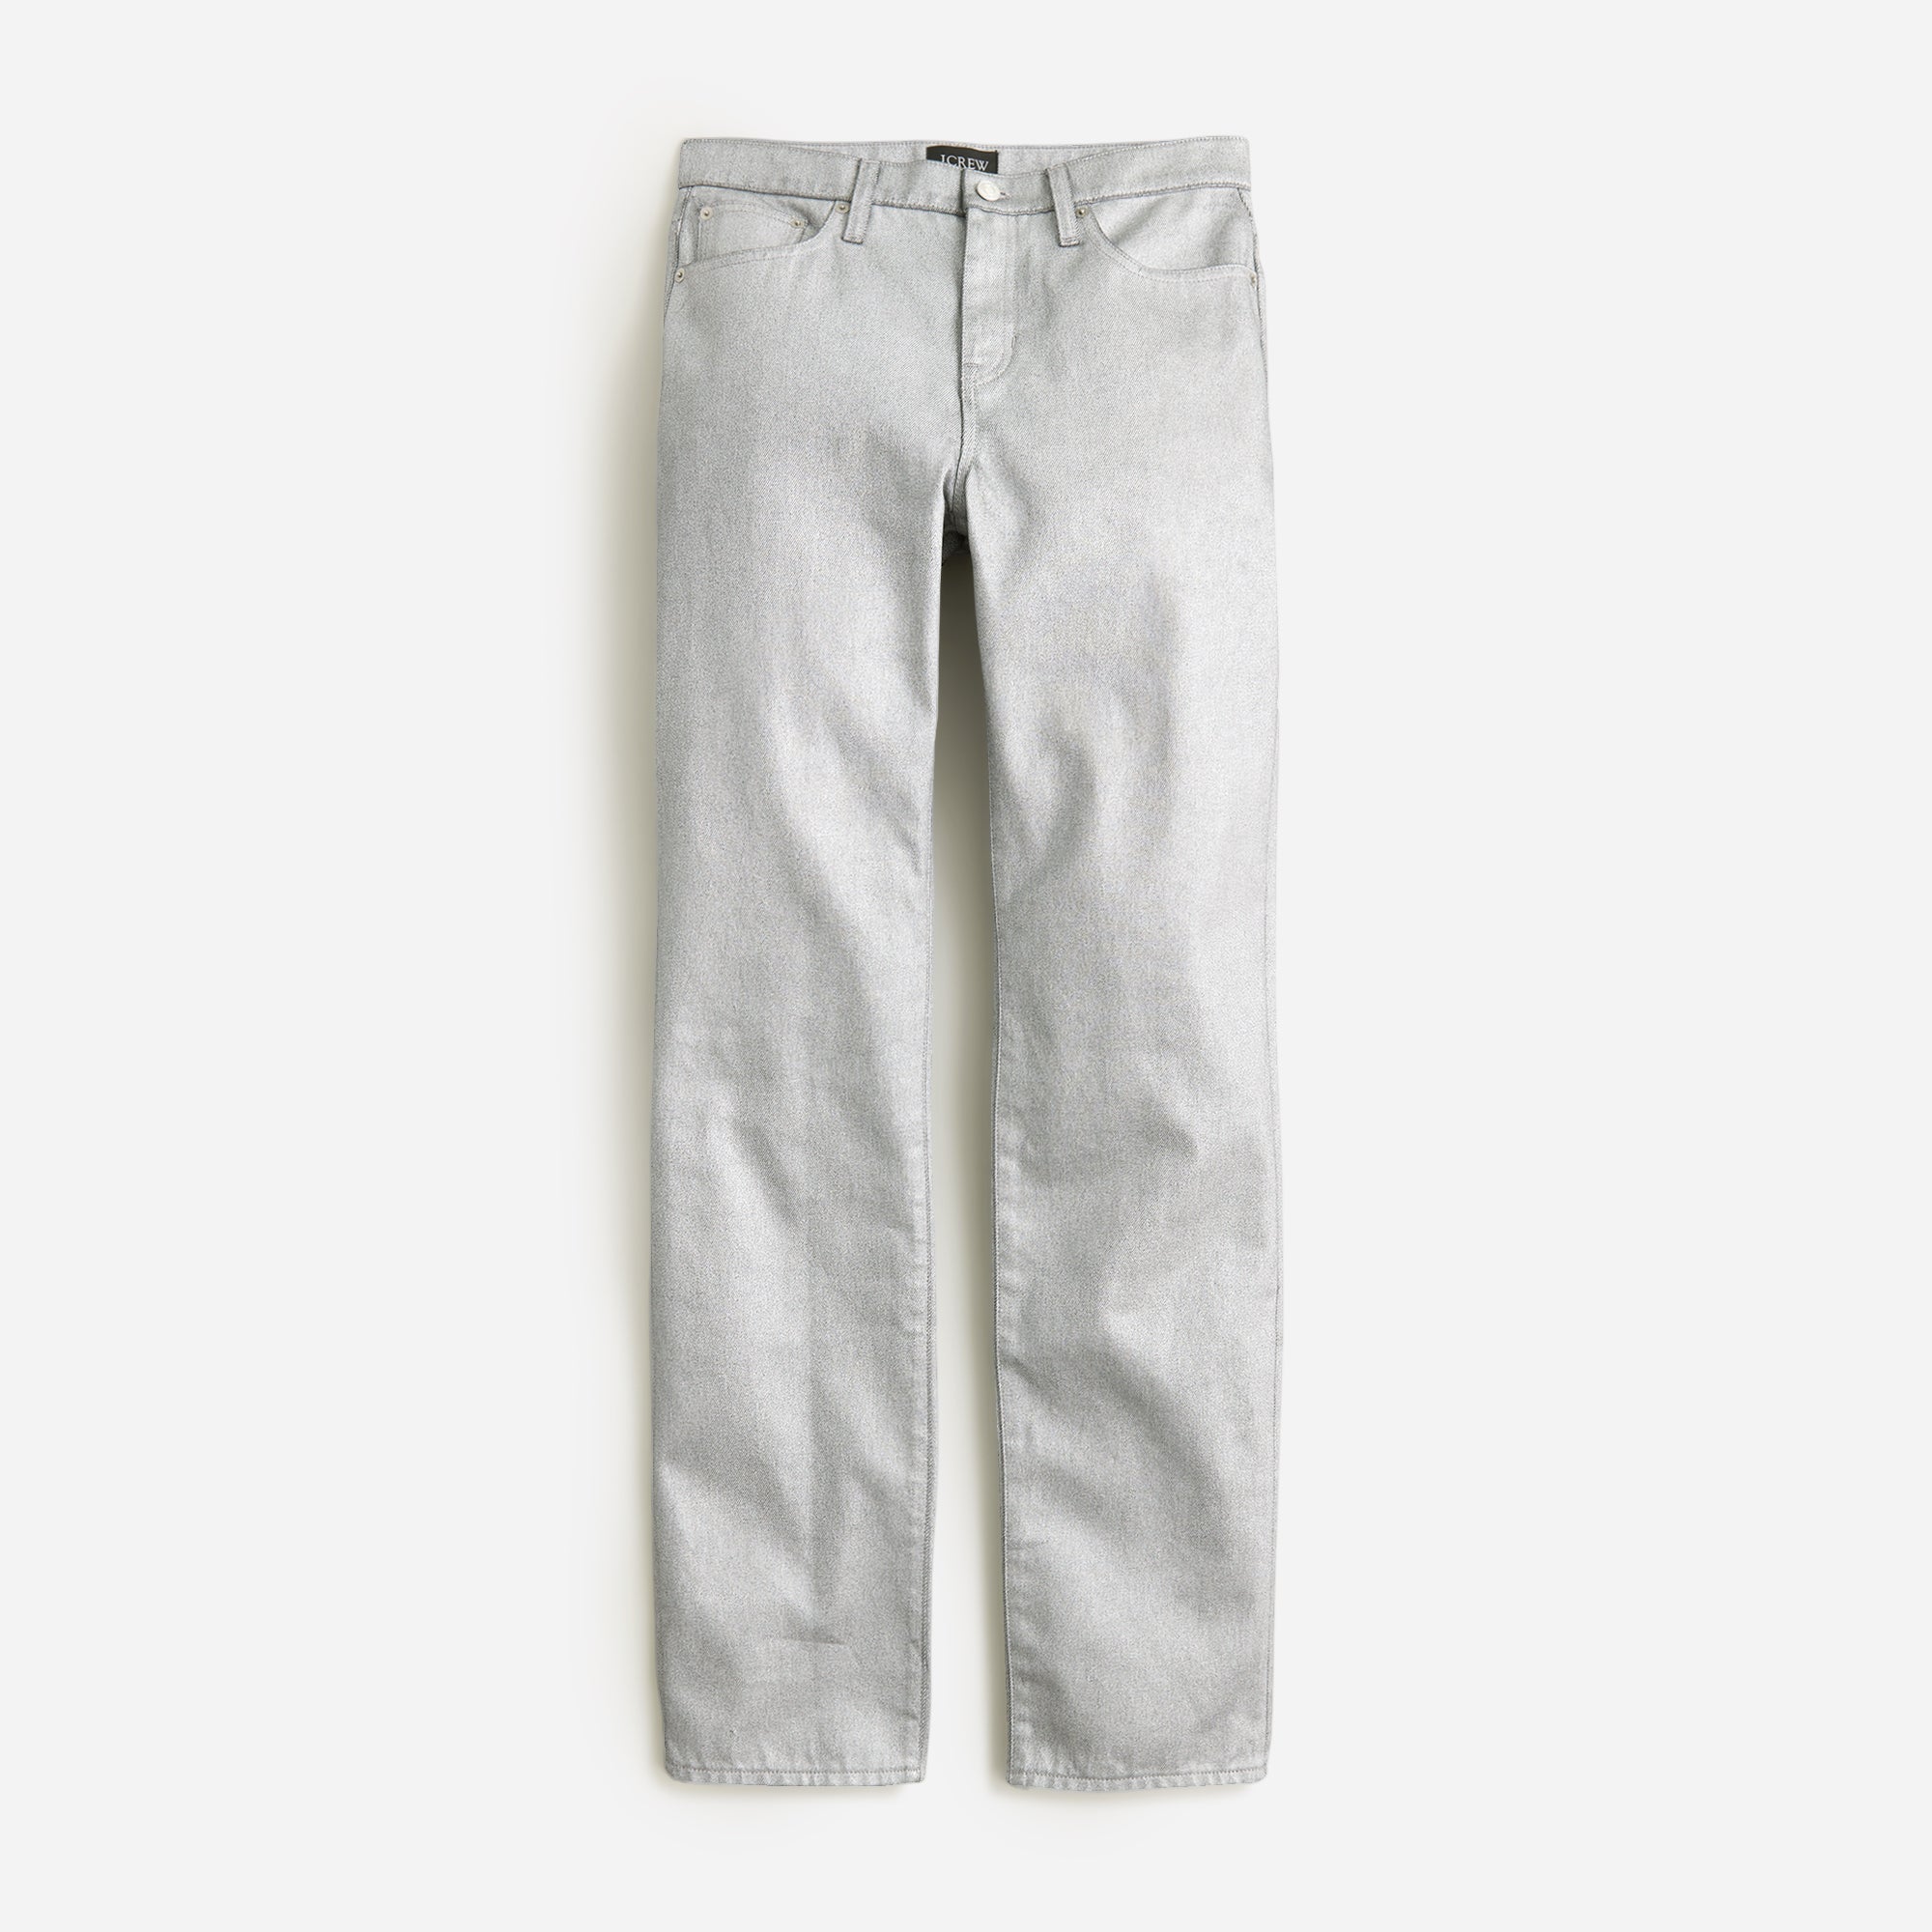 J. Crew + Collection slouchy-straight jean in silver